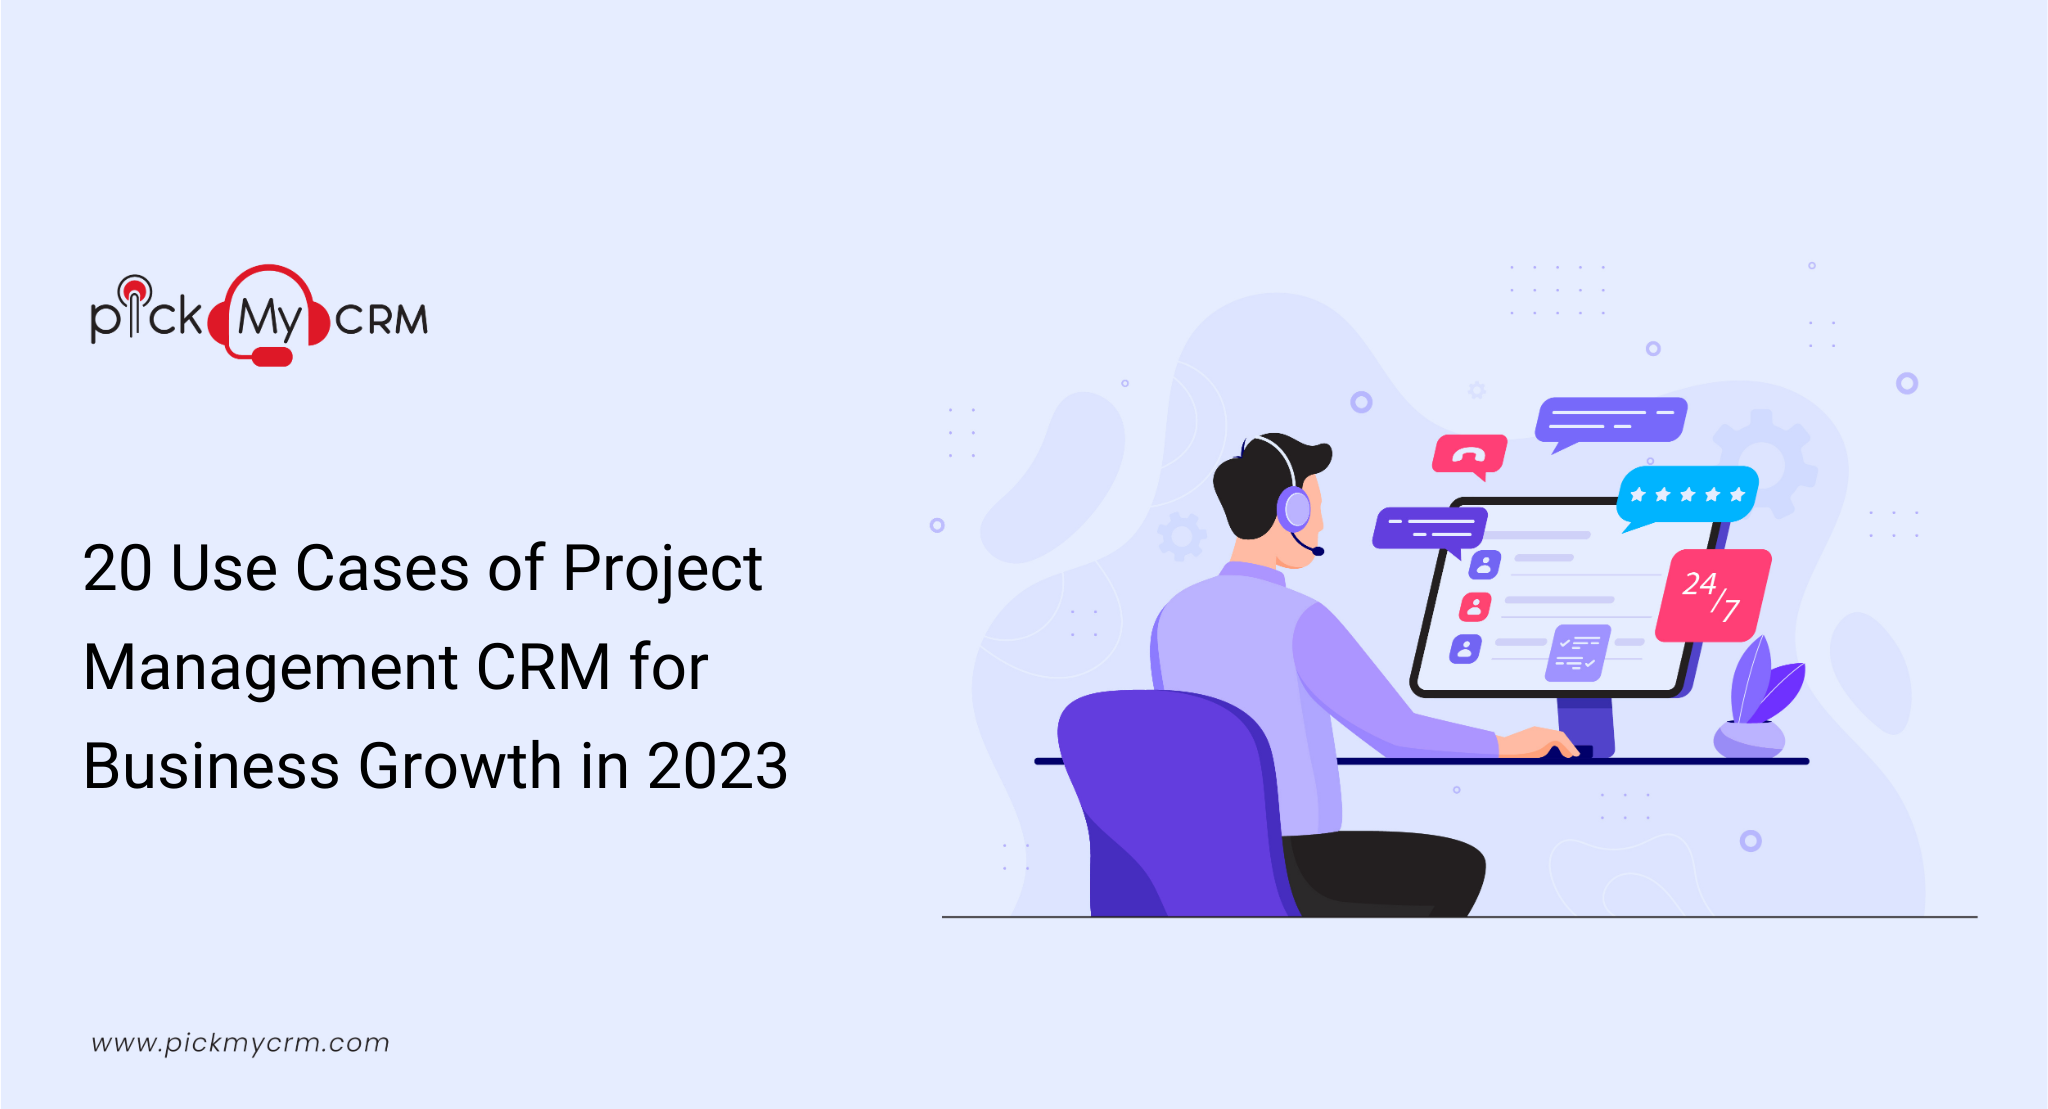 20 Use Cases of Project Management CRM for Business Growth in 2023